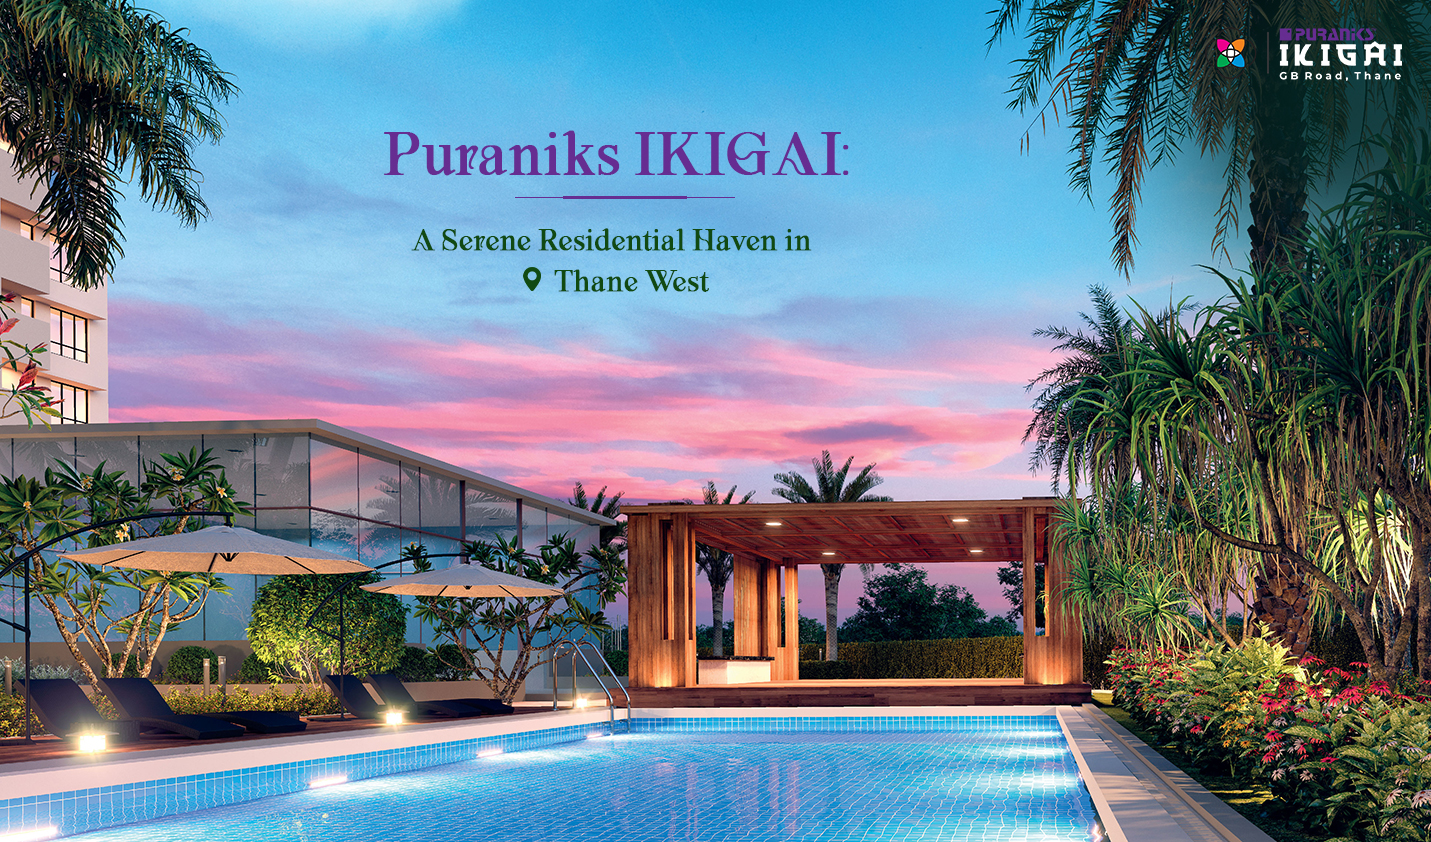 Puraniks IKIGAI: A Serene Residential Haven in Thane West